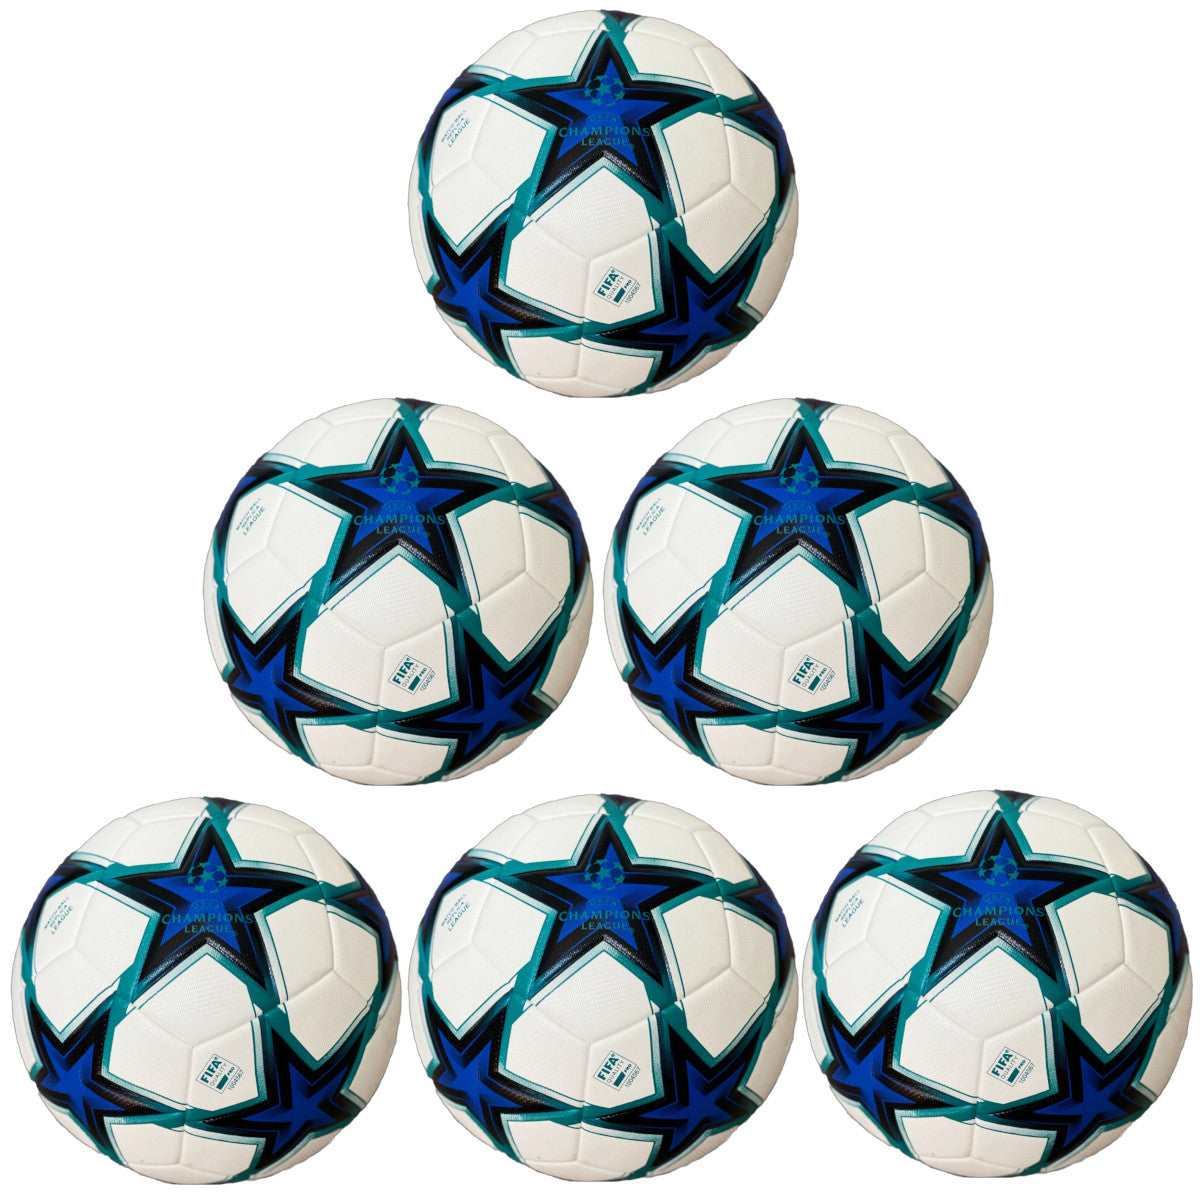 Soccer Ball Size 5 Pack of 10 Champions League for Training White Blue Black